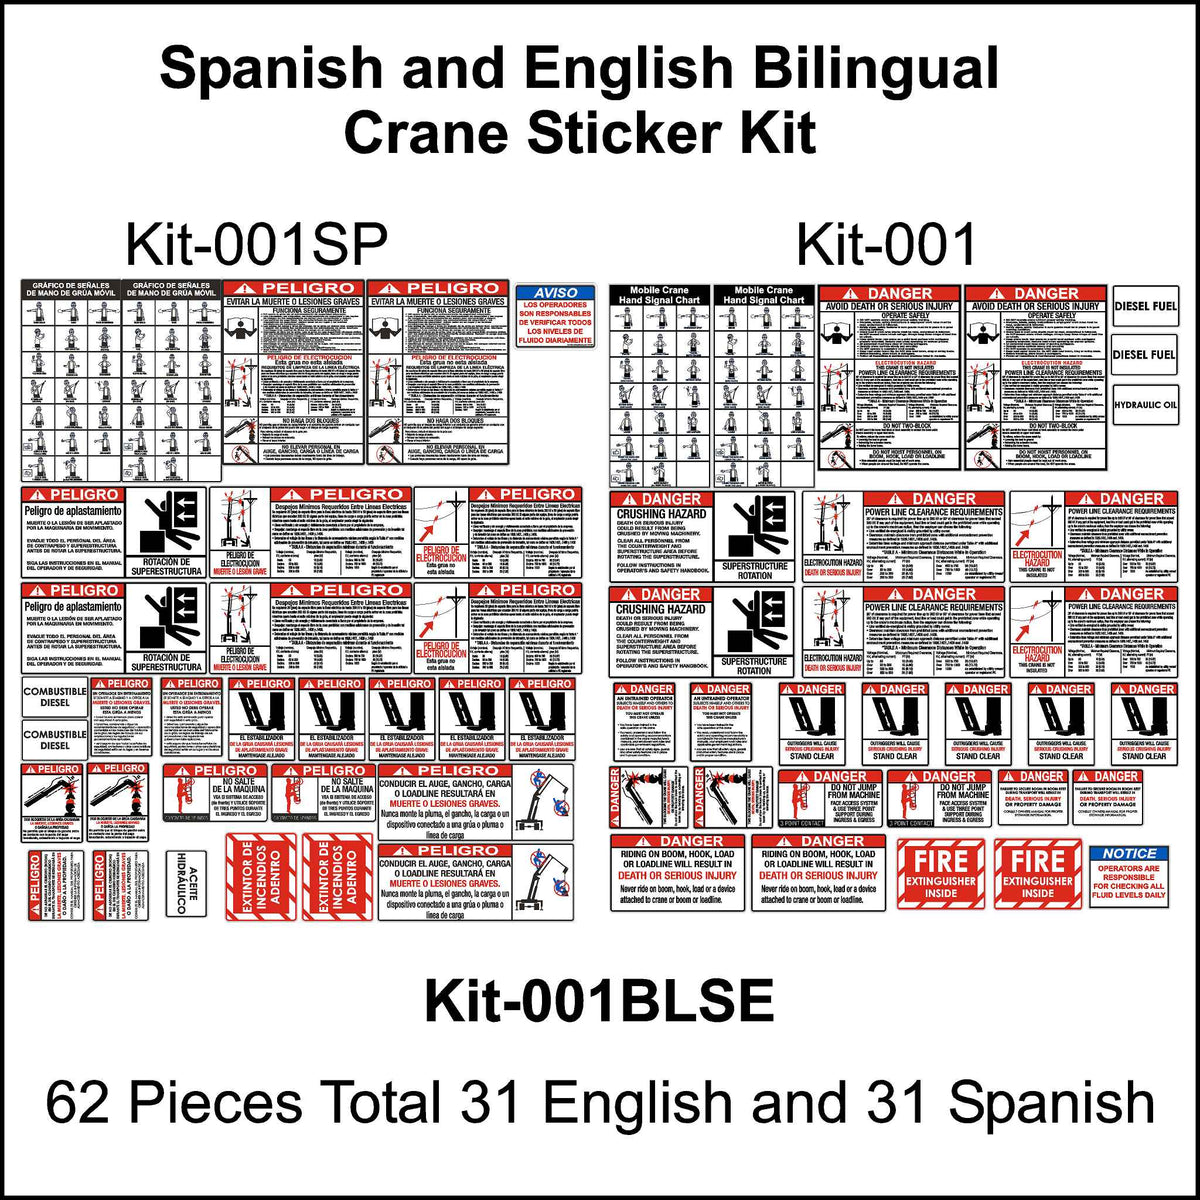 Spanish and English bilingual crane safety sticker kit. This kit provides all the stickers needed to pass osha inspection. Printed with the correct headers and bright lettering and pictorials of each warning needed. 